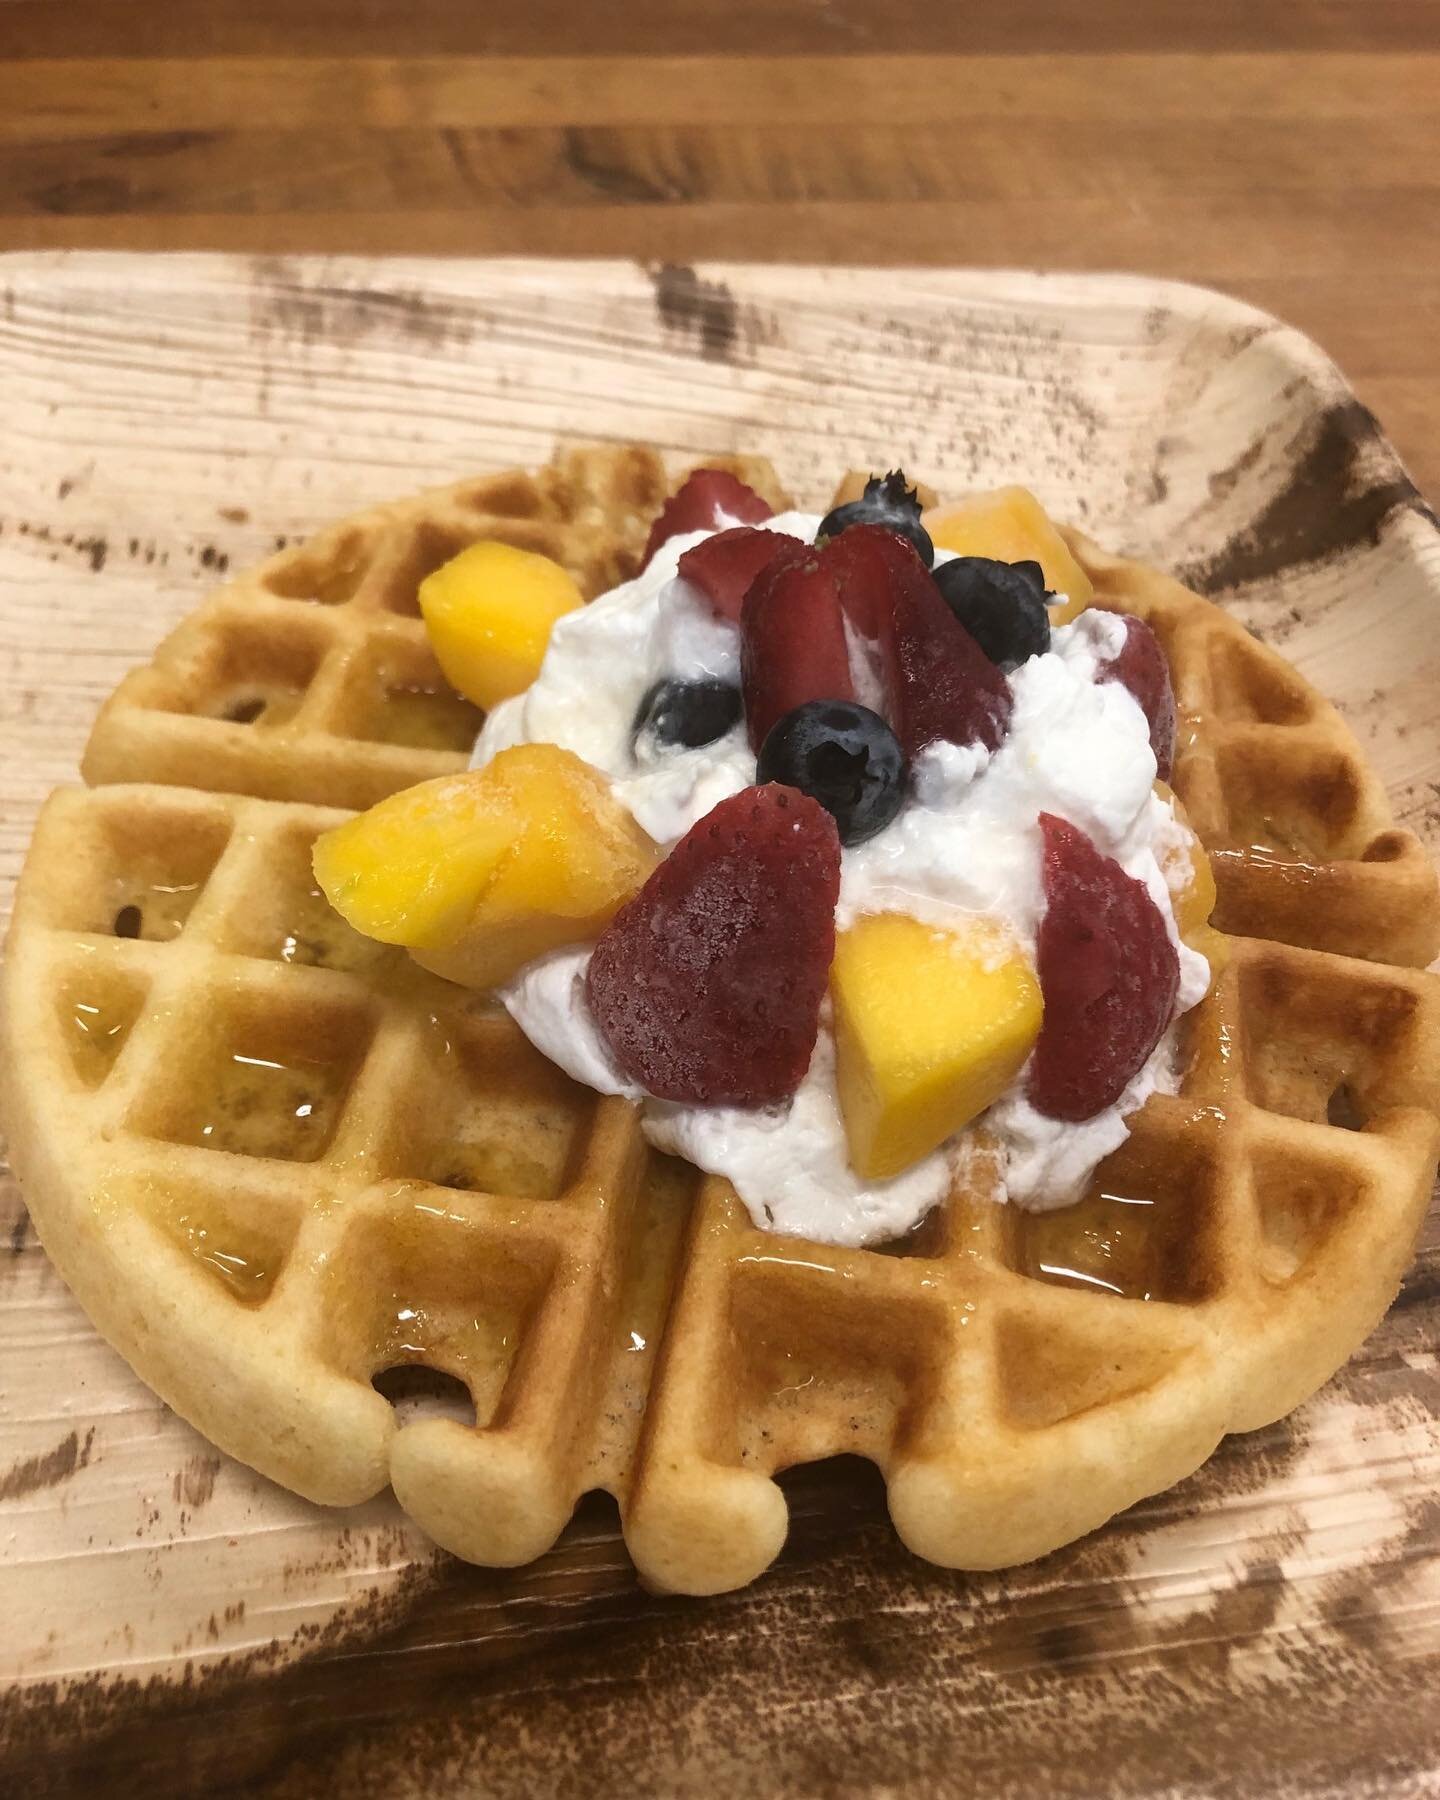 Pop on over to Popover Cafe and Bakery and try our Popover Waffle topped with whipped cream and fruit with a side of Lilikoi Syrup!! Extra side of unsalted butter or our Lilikoi butter for $1!!